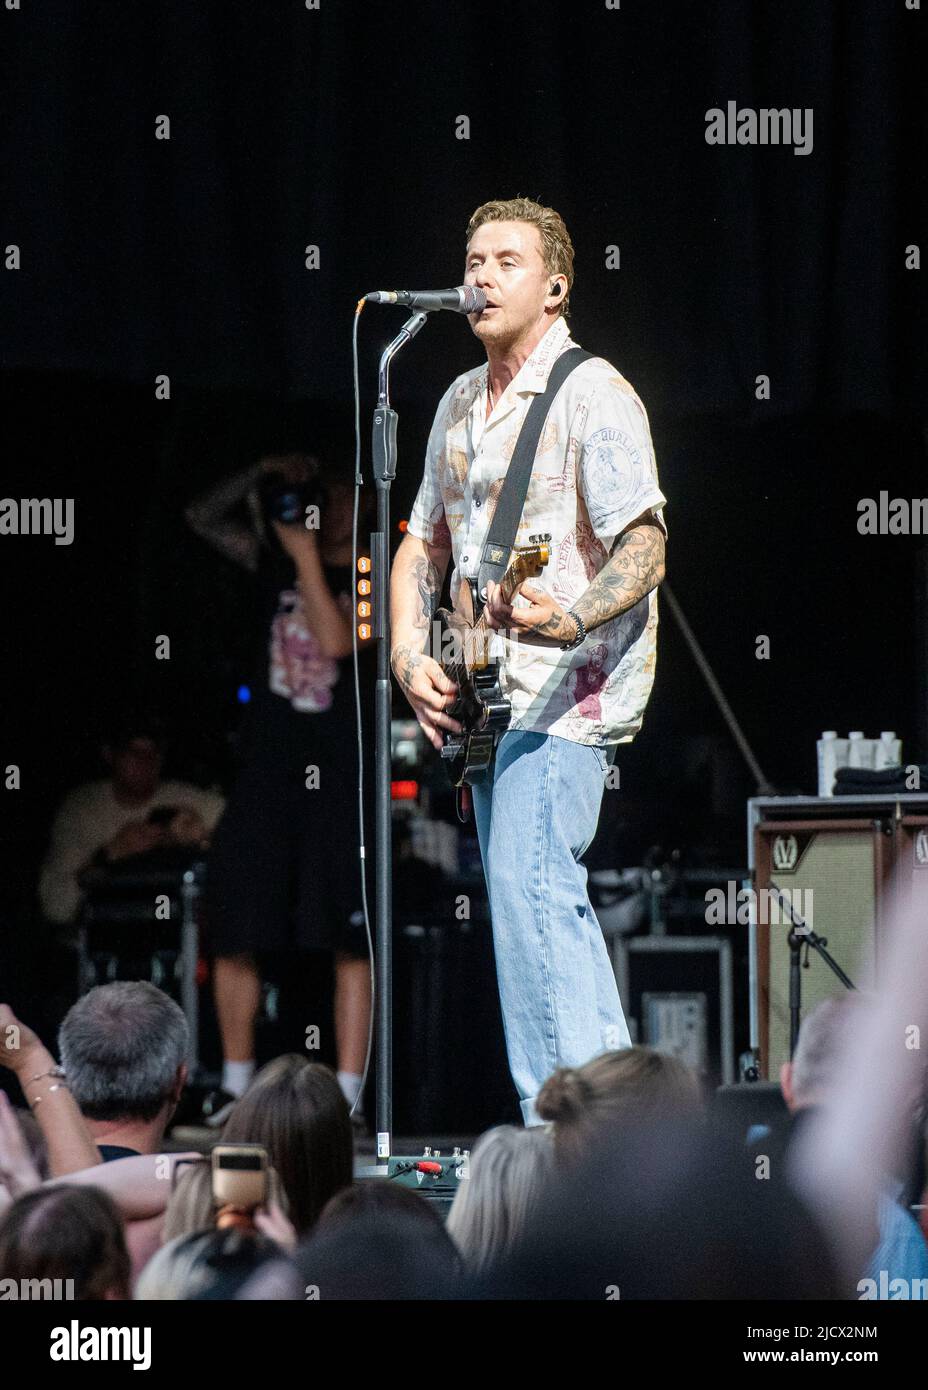 London, UK, Wednesday, 15th June 2022  Danny Jones of McFly performs live on stage as part of the Hampton Court Palace Festival, Hampton Court, East Molesey. Credit: DavidJensen / Empics Entertainment / Alamy Live News Stock Photo